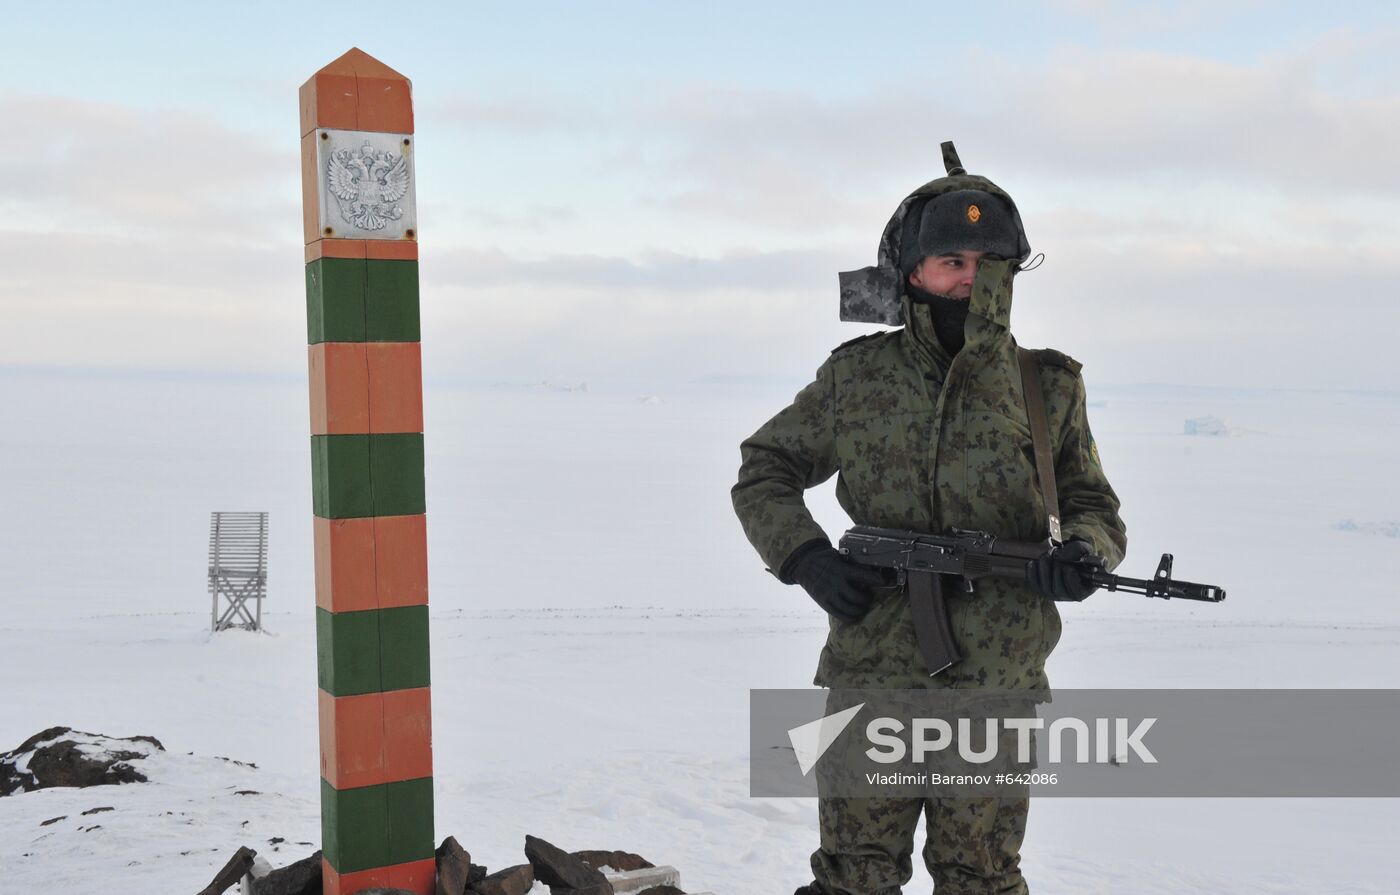 Frontier guard at frontier station "Nagurskoye"